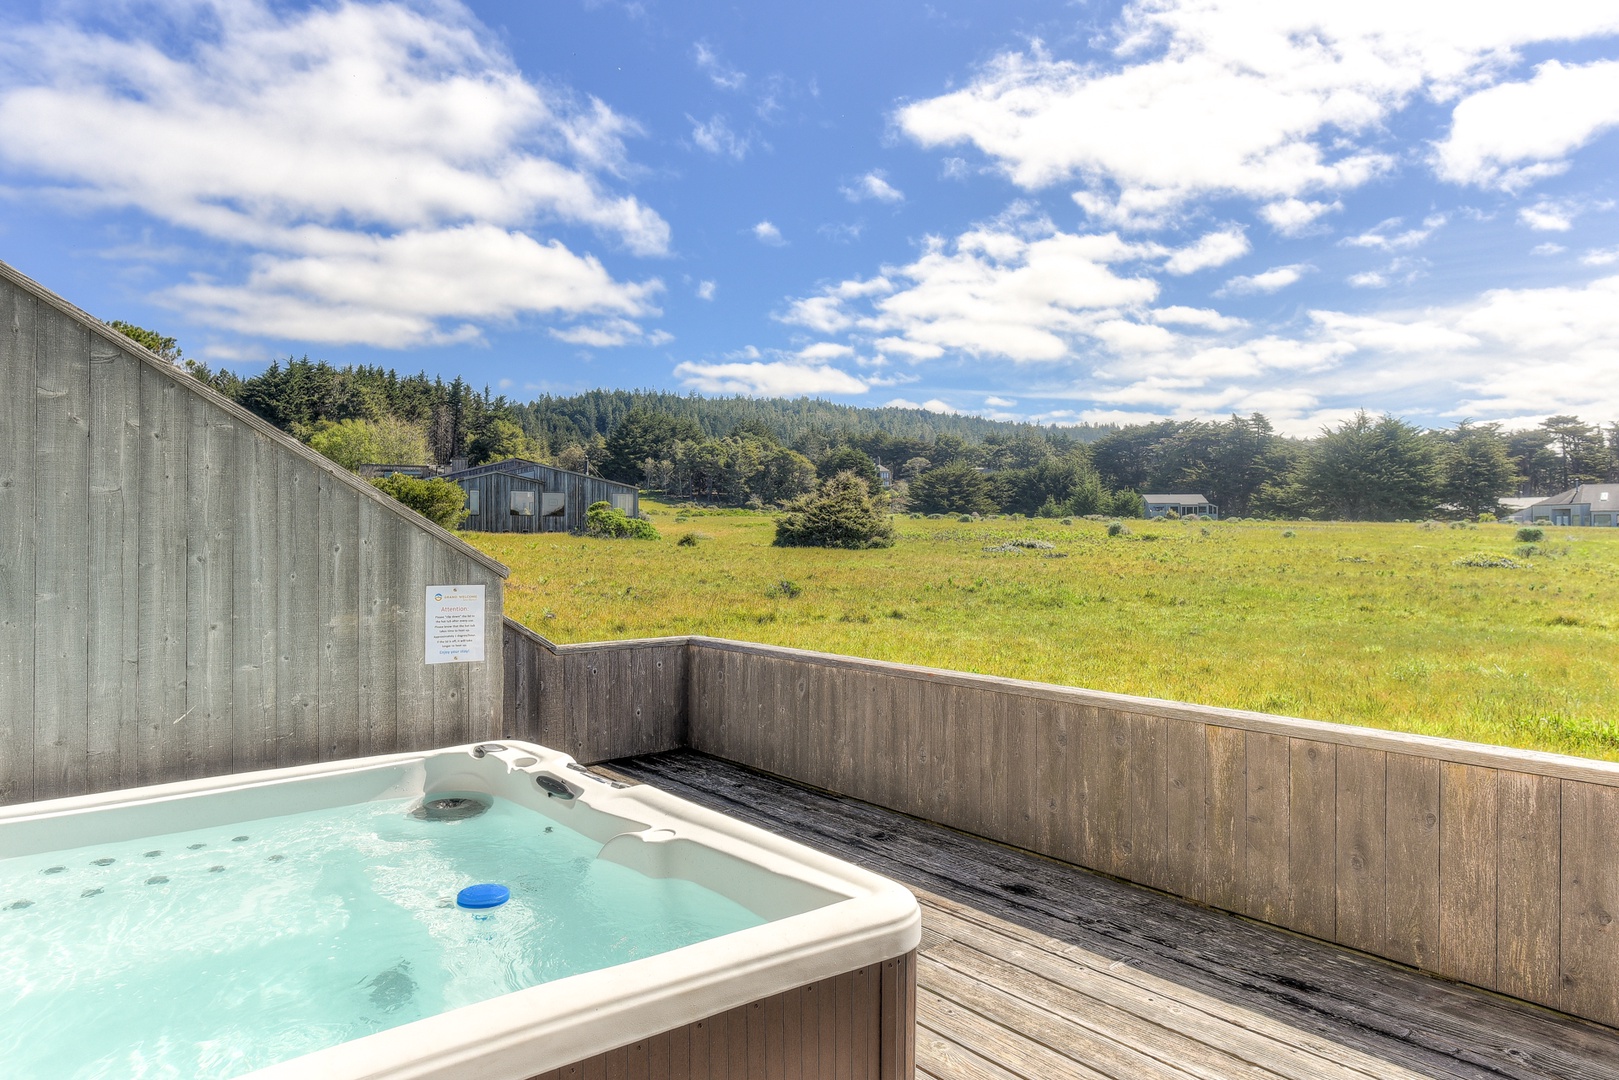 Indulge in the luxury of a private hot tub